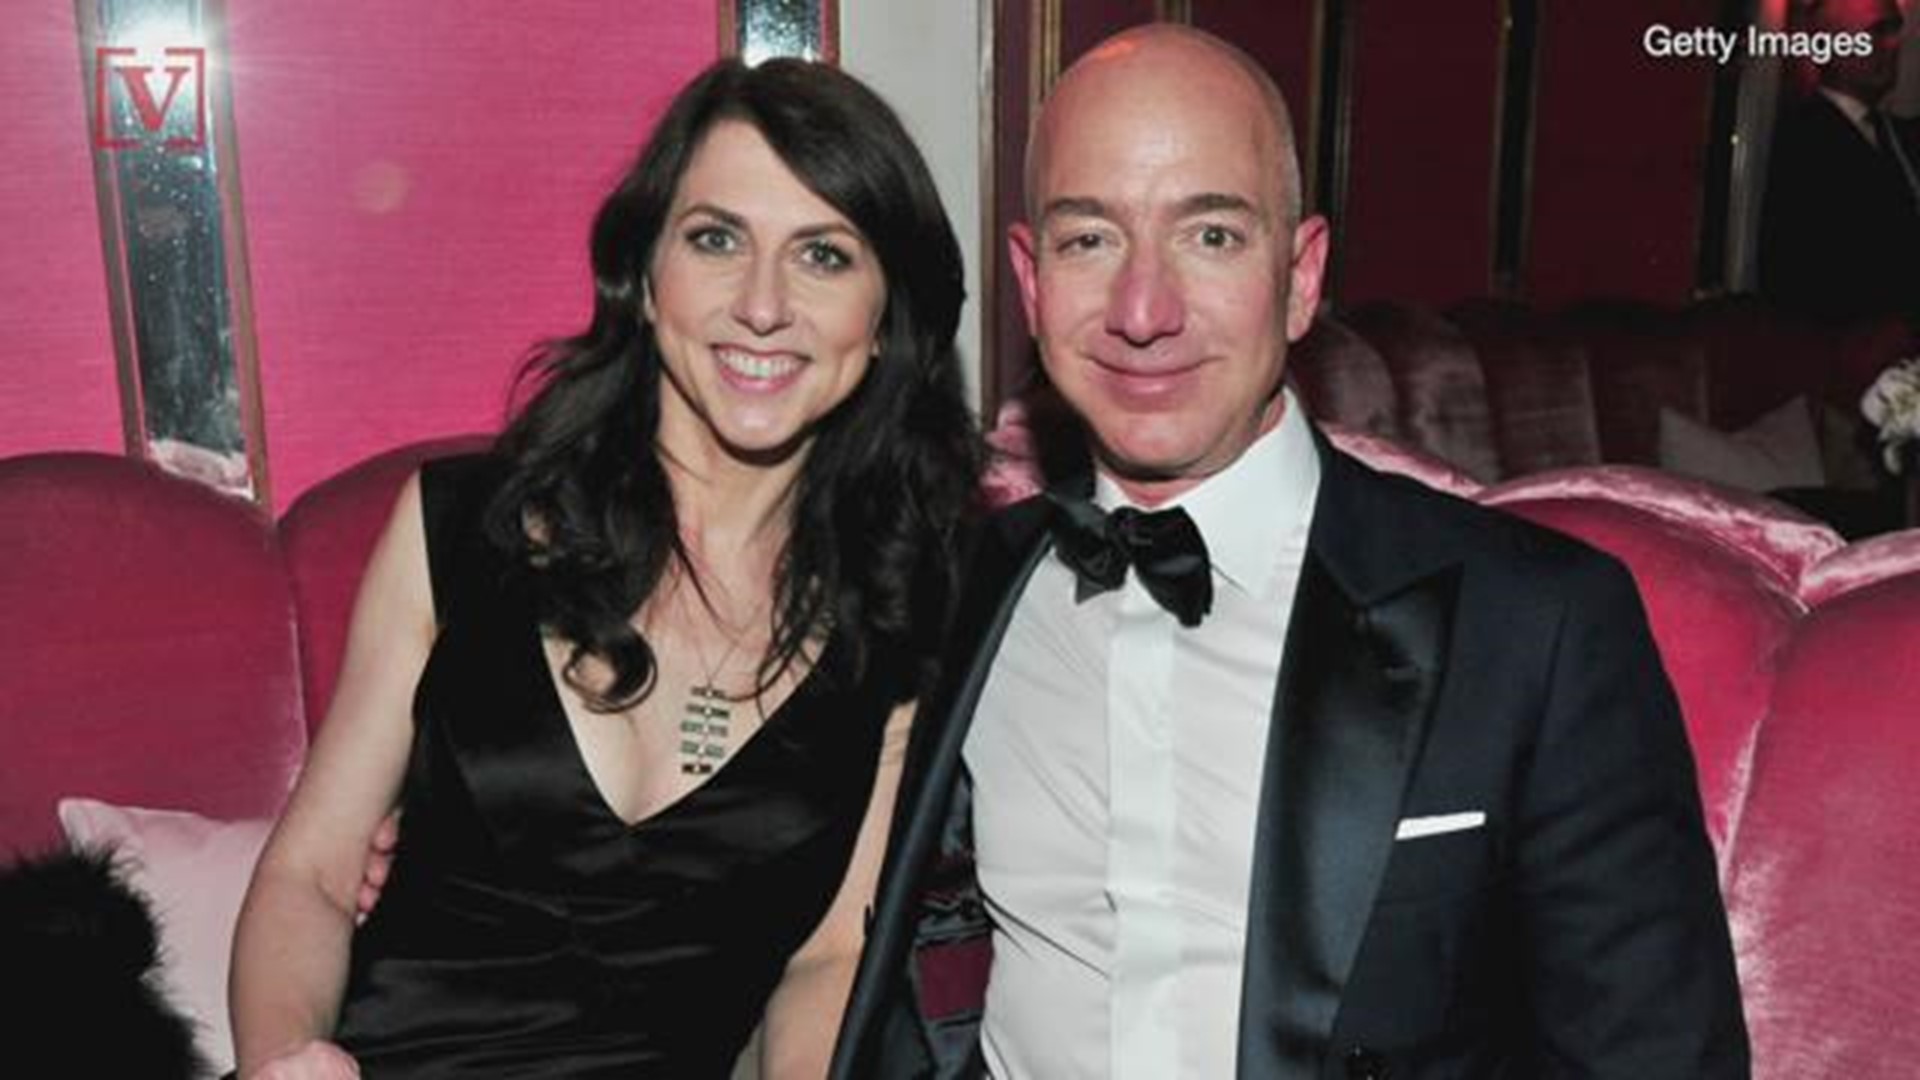 Amazon CEO Jeff Bezos and his wife MacKenzie are getting divorced, and it could be the most expensive one in history.